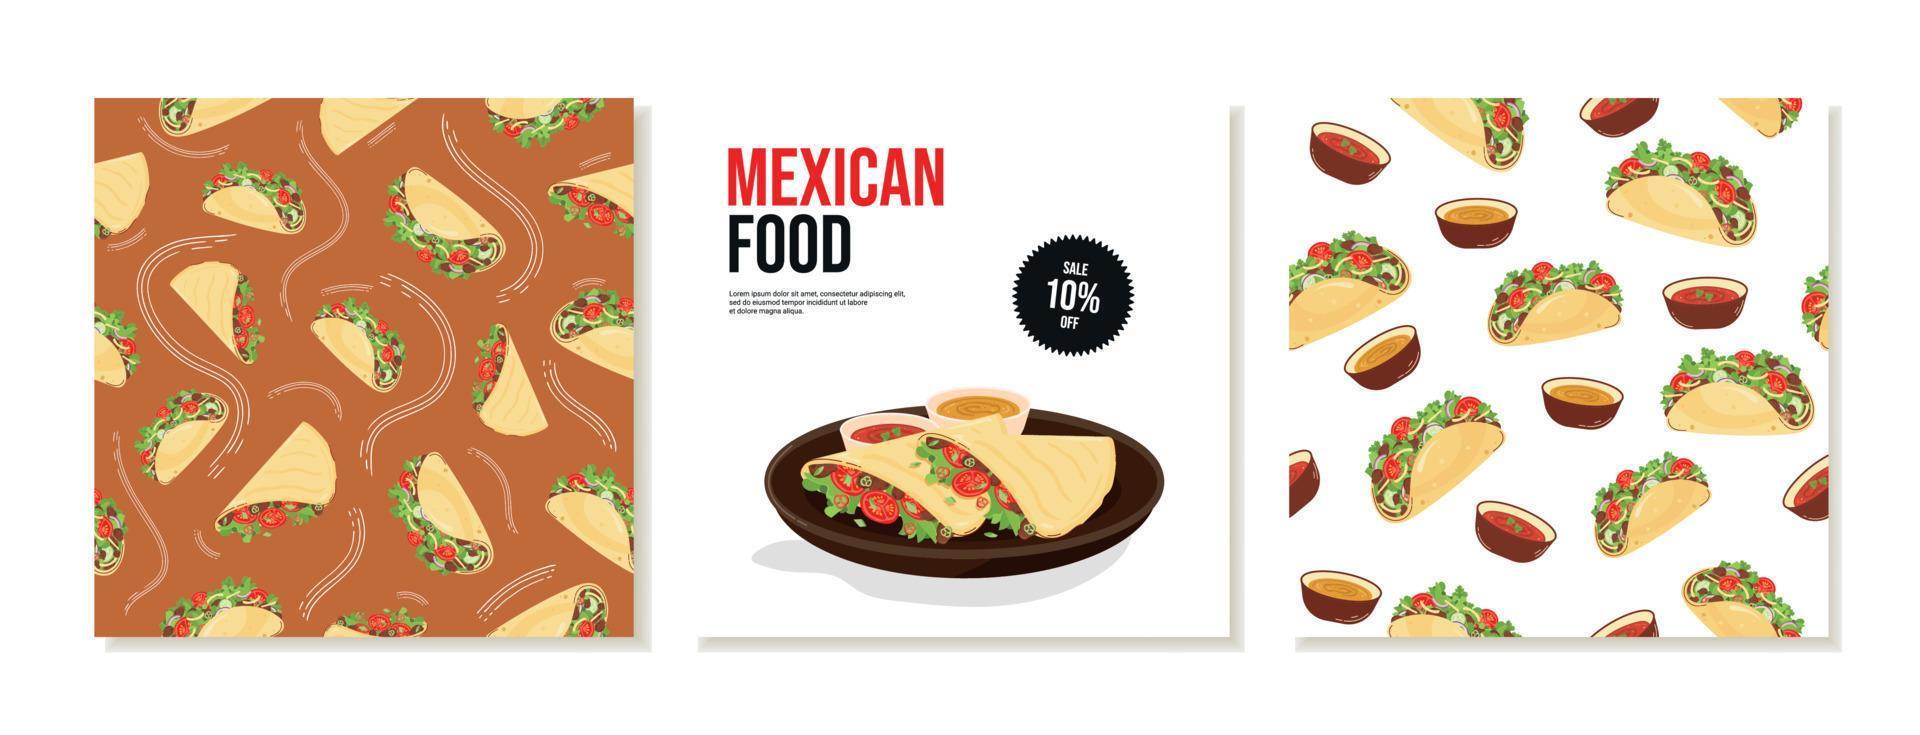 Set of templates with seamless patterns for advertising a Latin American restaurant. Mexican food, quesadillas, tacos. Vector